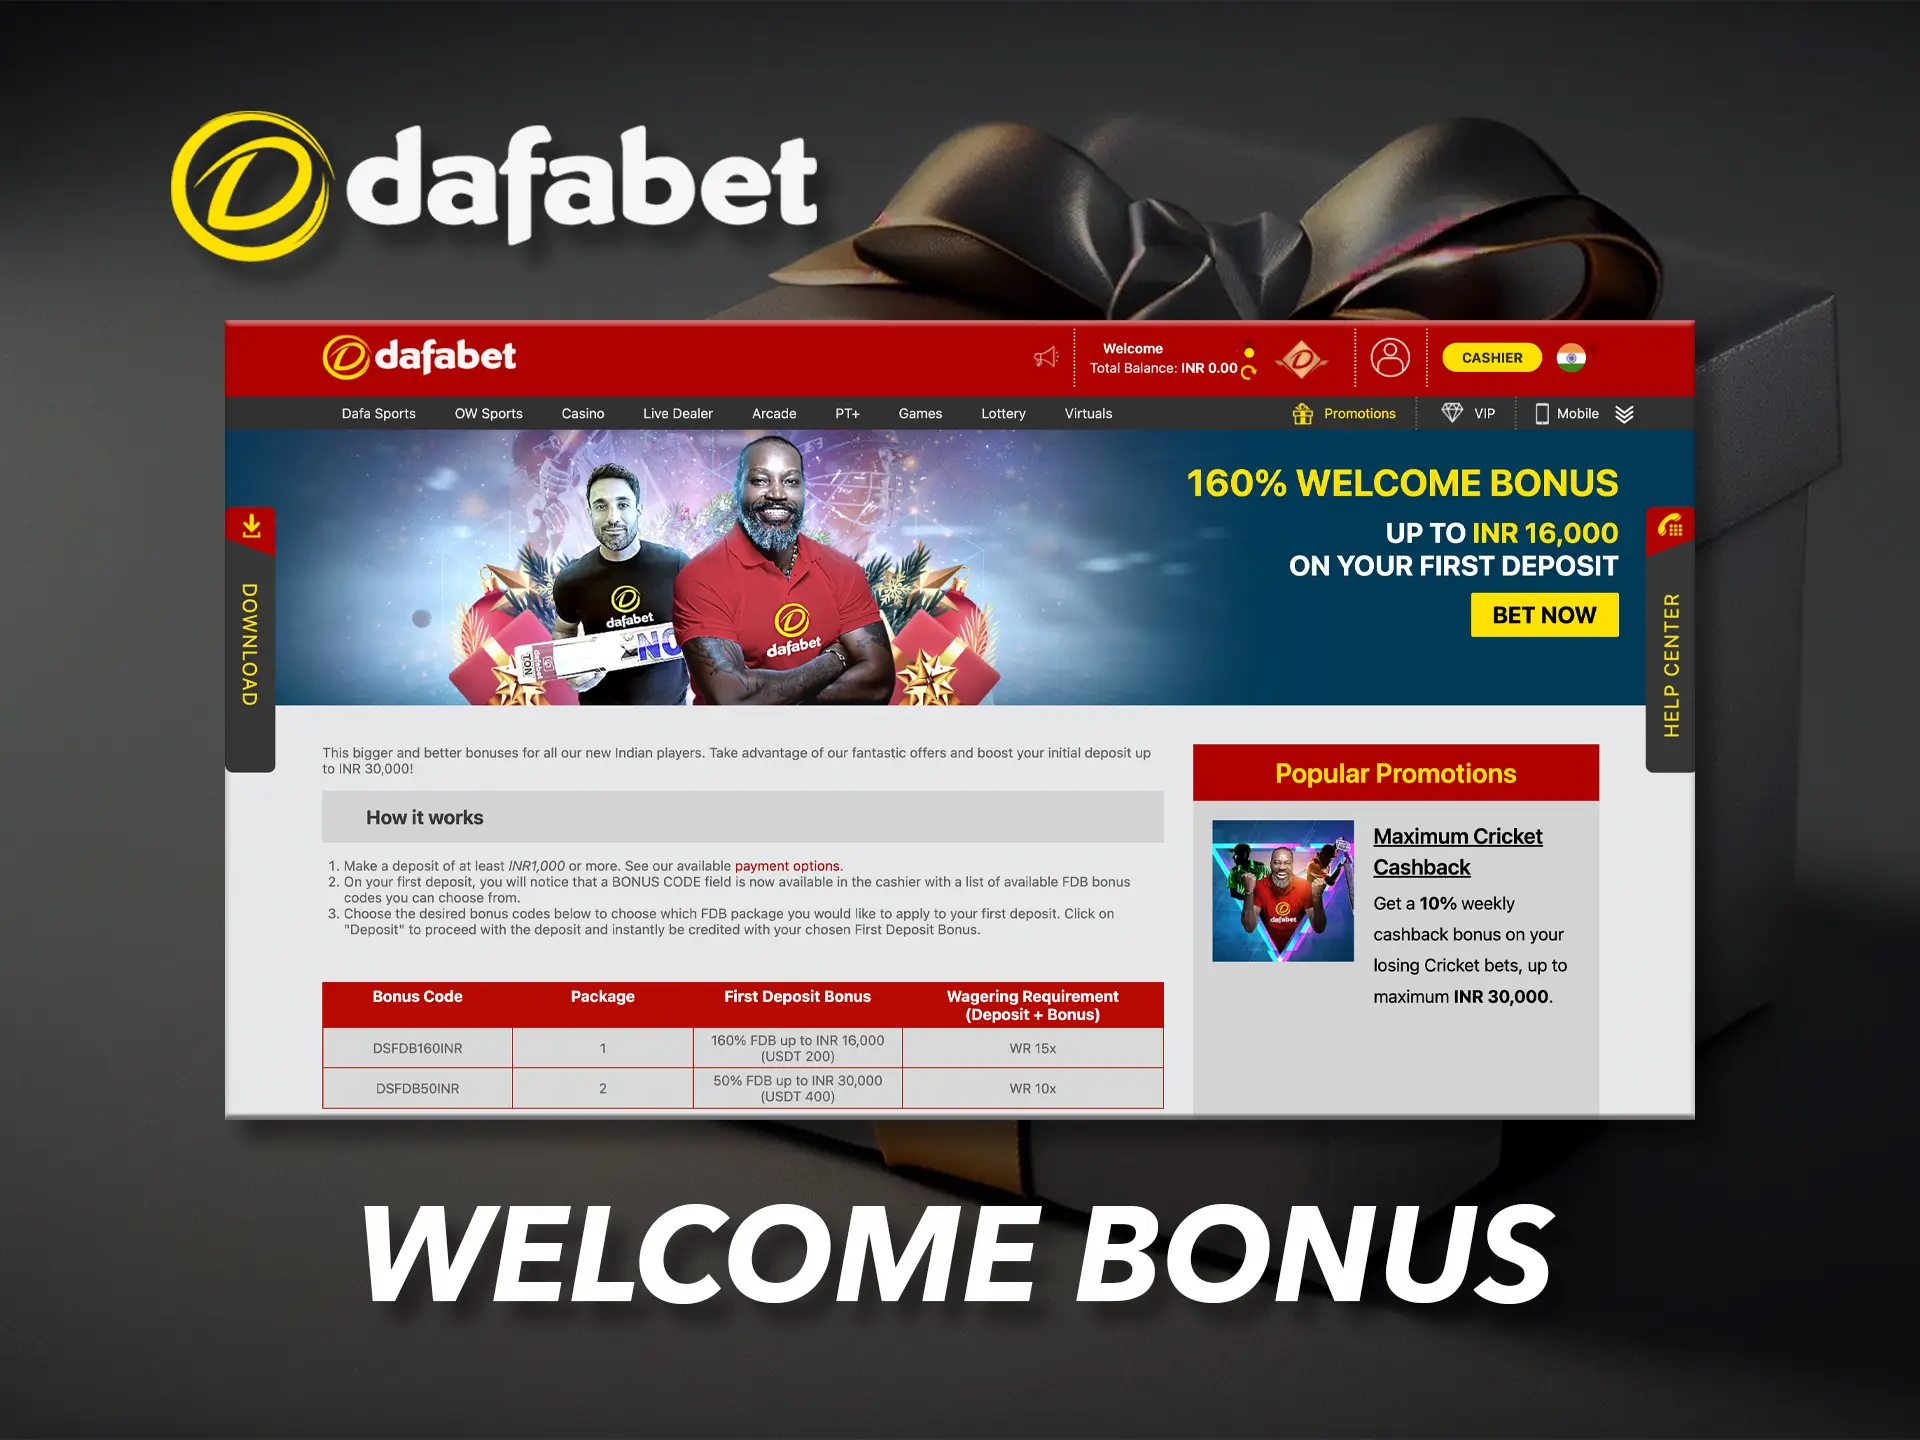 For newcomers to Dafabet Casino, there's a swanky bonus to get you off to a confident start.